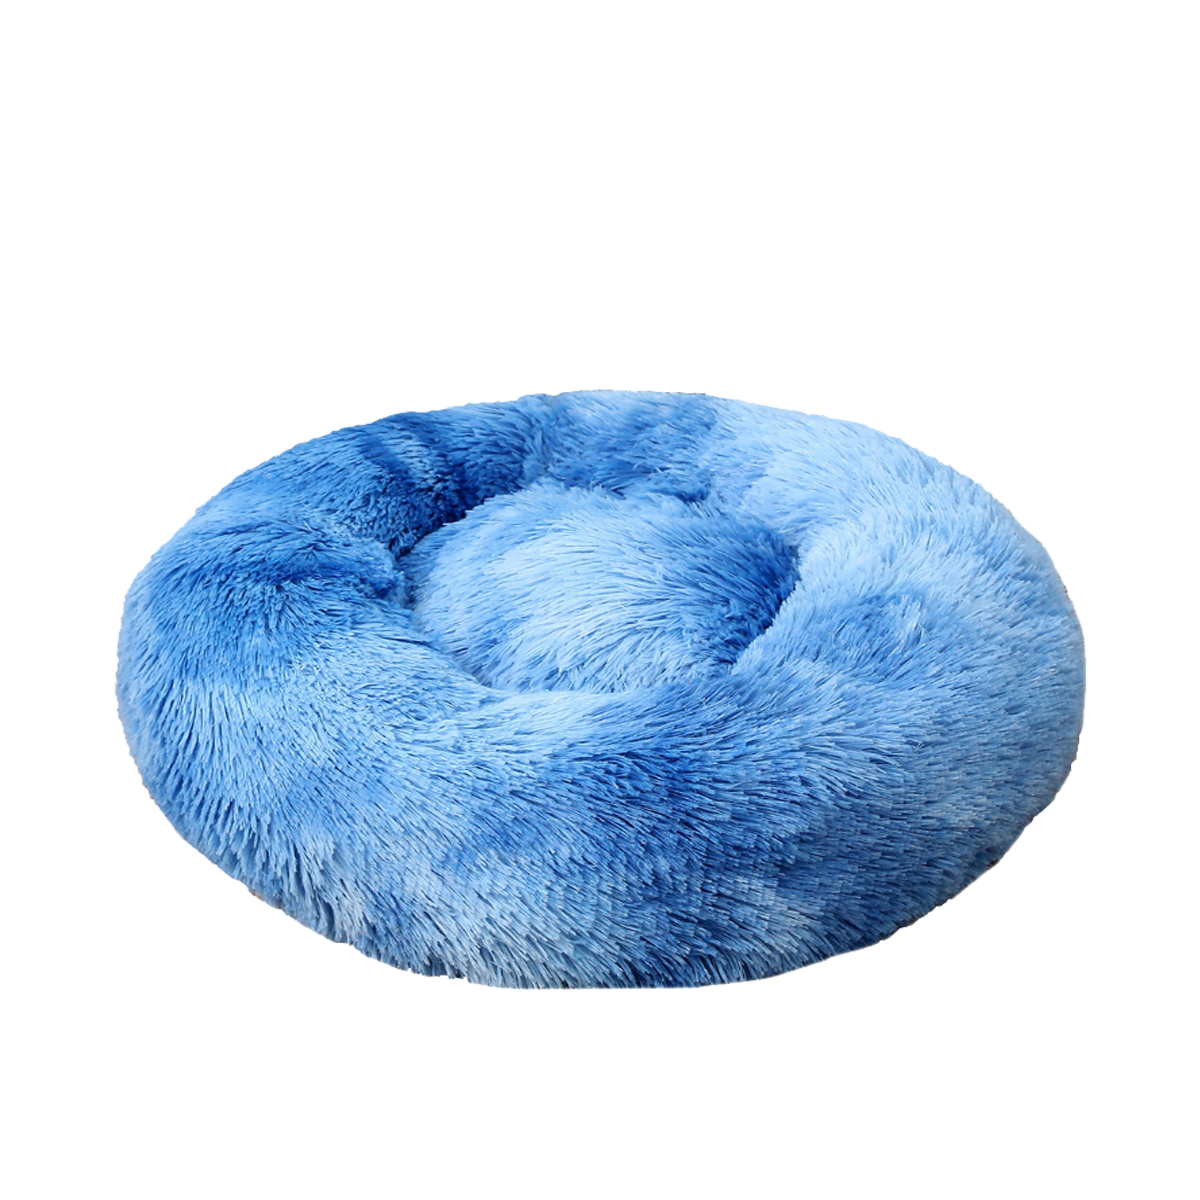 70cm-Plush-Fluffy-Soft-Pet-Bed-for-Cats--Dogs-Calming-Bed-Pad-Soft-Mat-Home-1808936-9